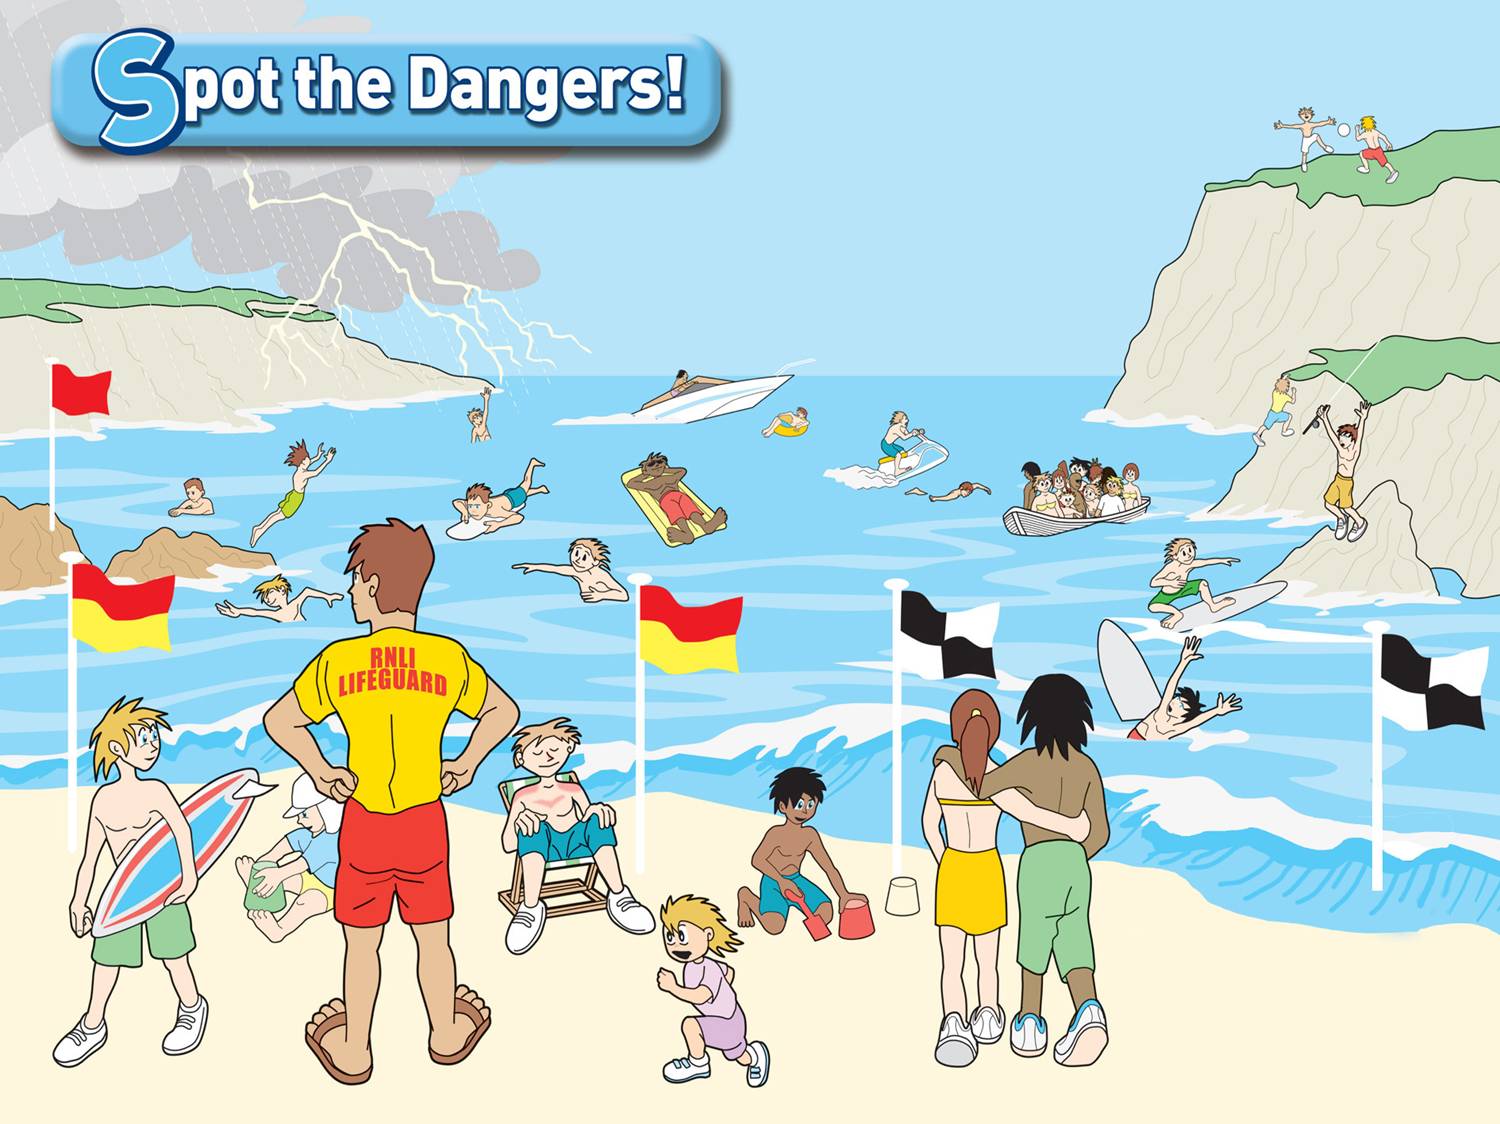 Spot the Dangers banner used in Beach Safety talks